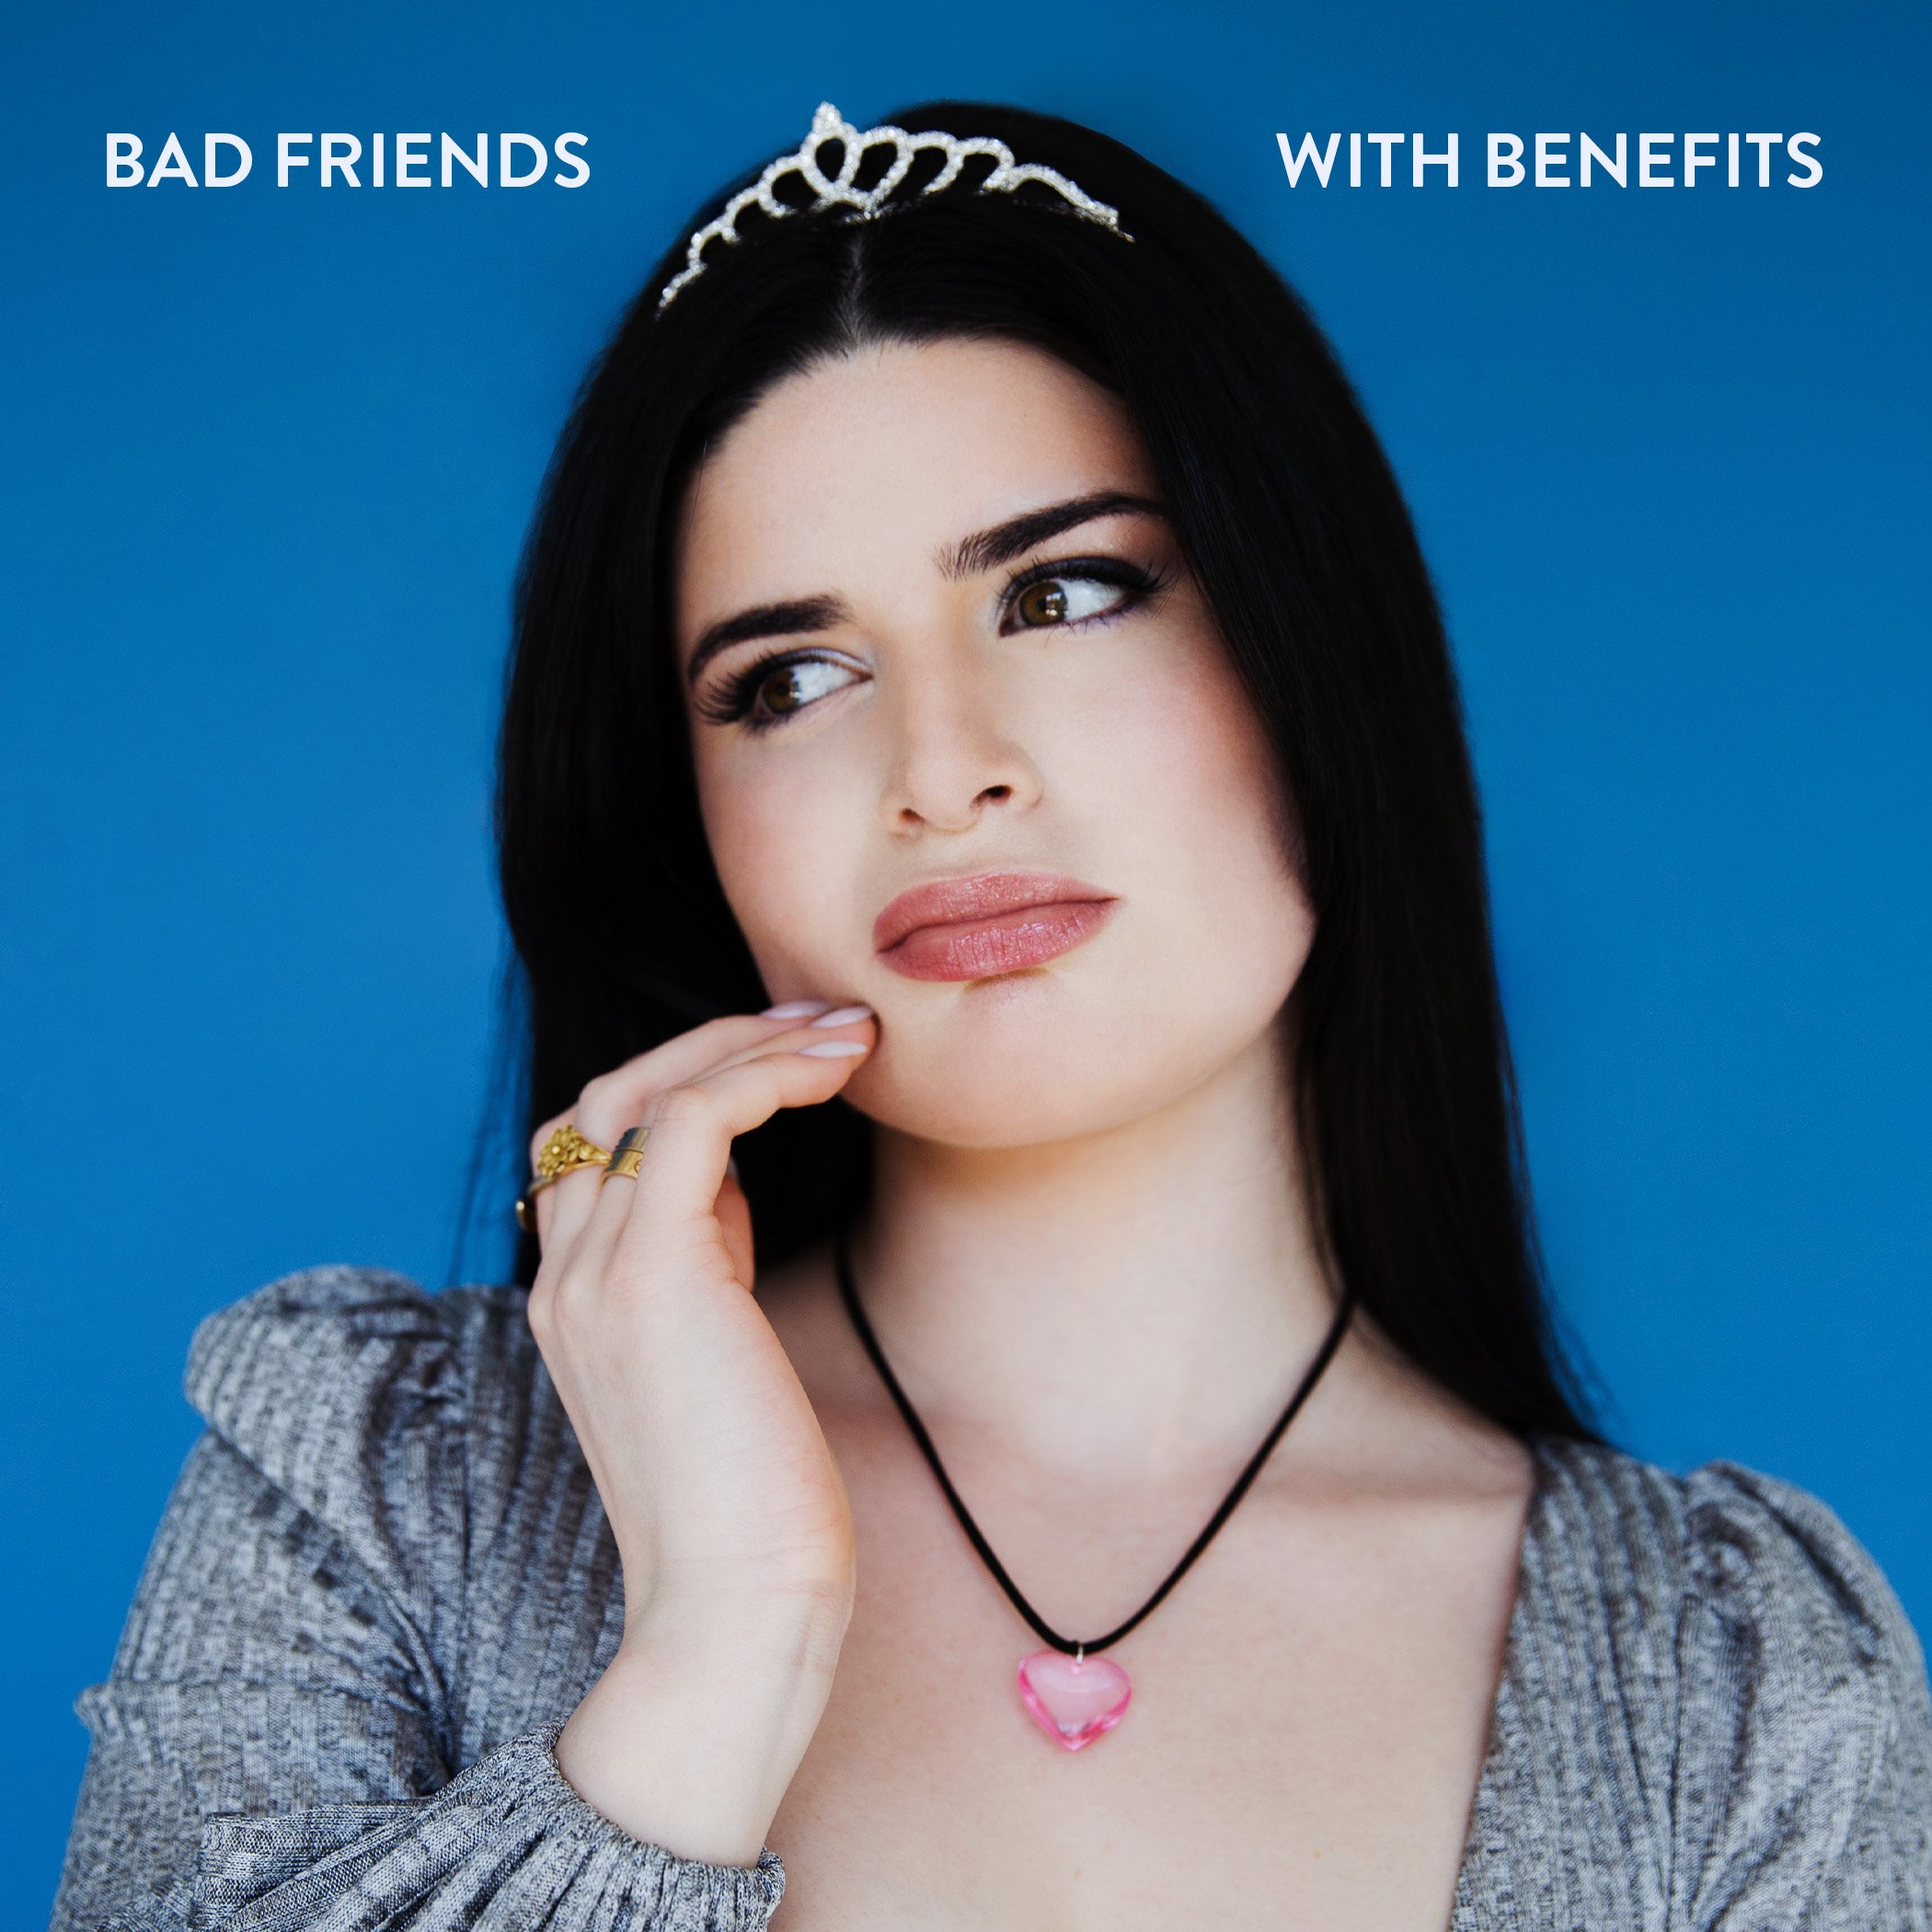 BAD FRIENDS WITH BENEFITS BY CHLOE XIANG.jpg